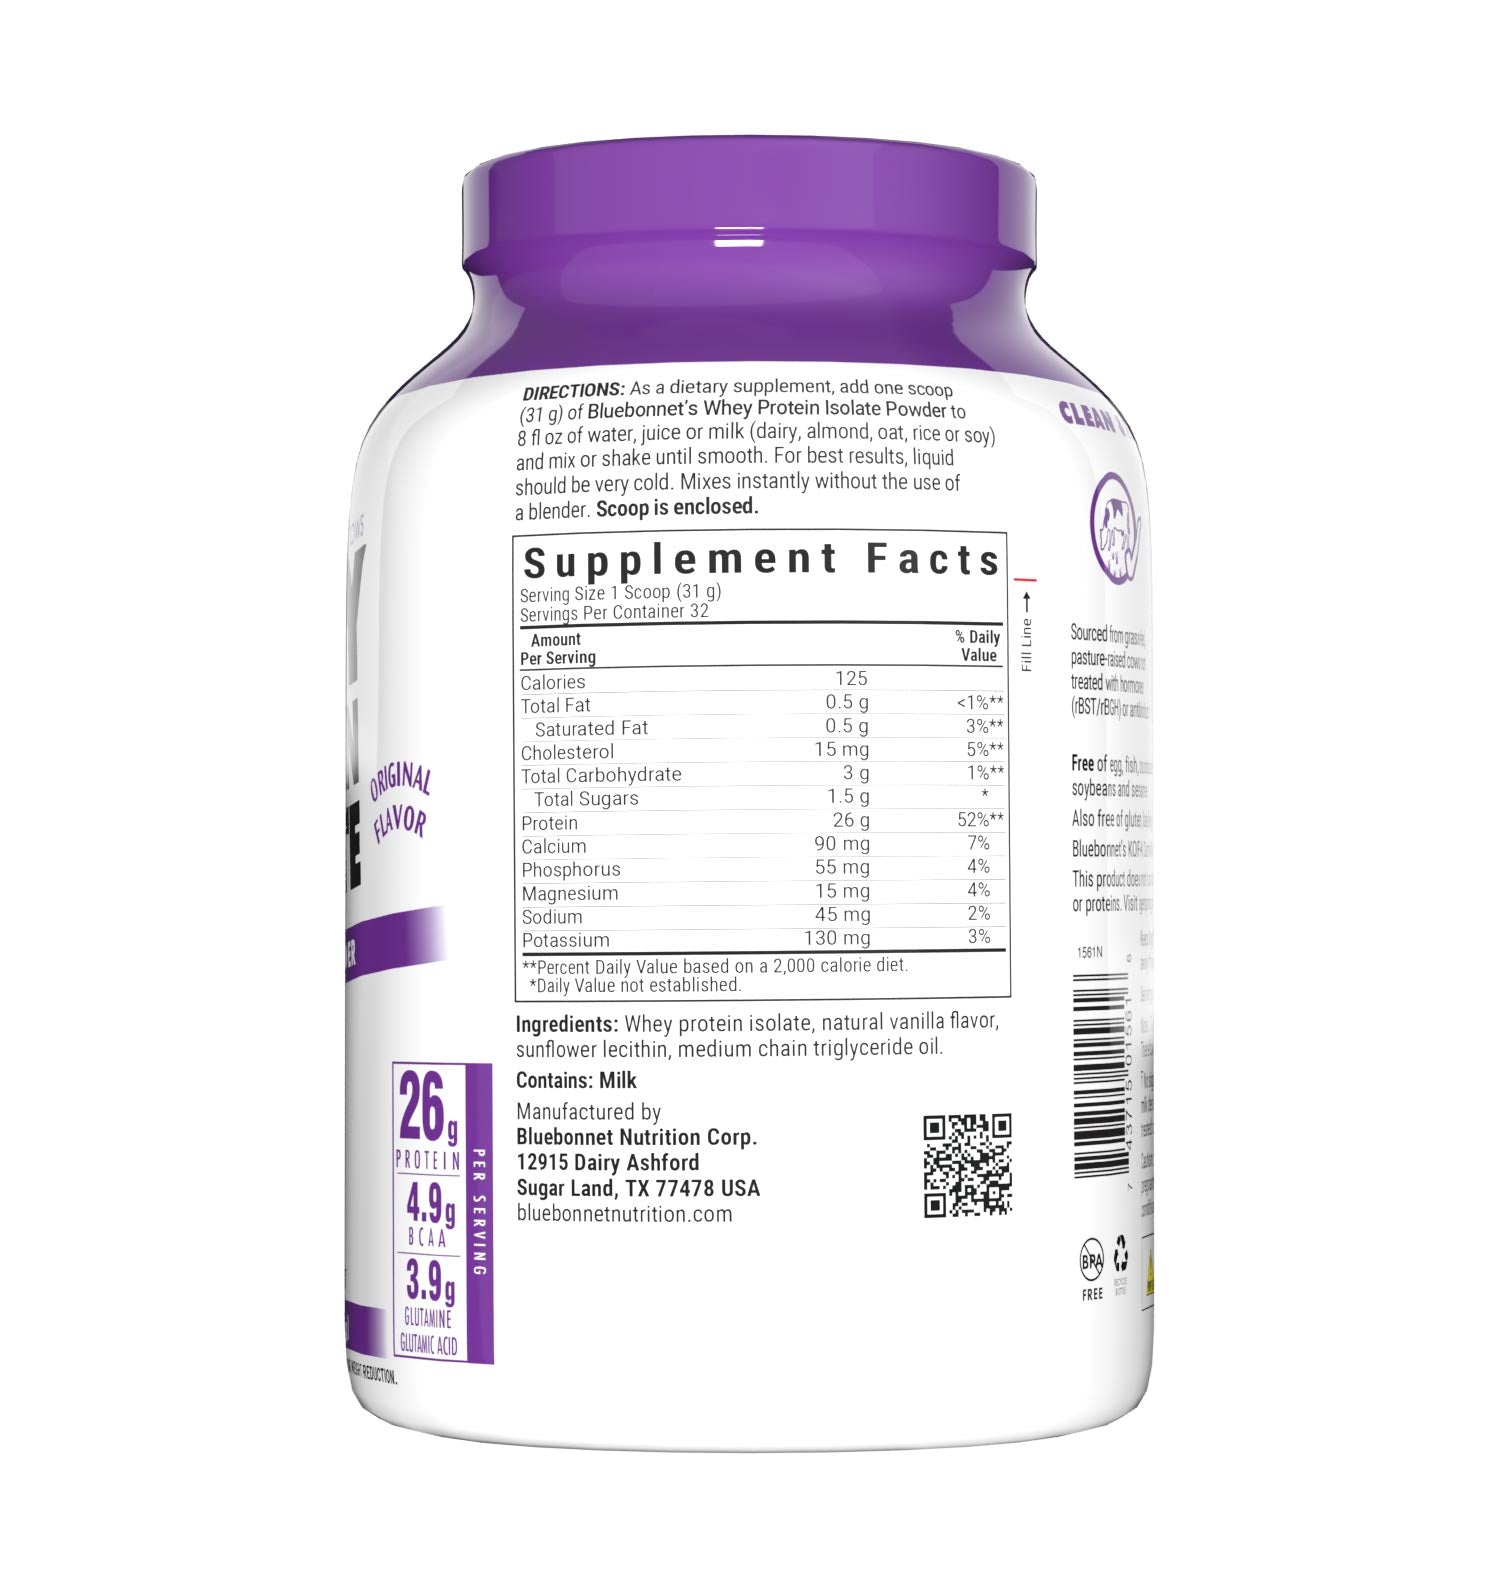 Bluebonnet's Whey Protein Isolate Powder. Original flavor. 26 g of protein, 4.9 g BCAA and 3.9 g Glutamine Glutamic Acid per serving. Supplement facts panel. #size_2.2 lb